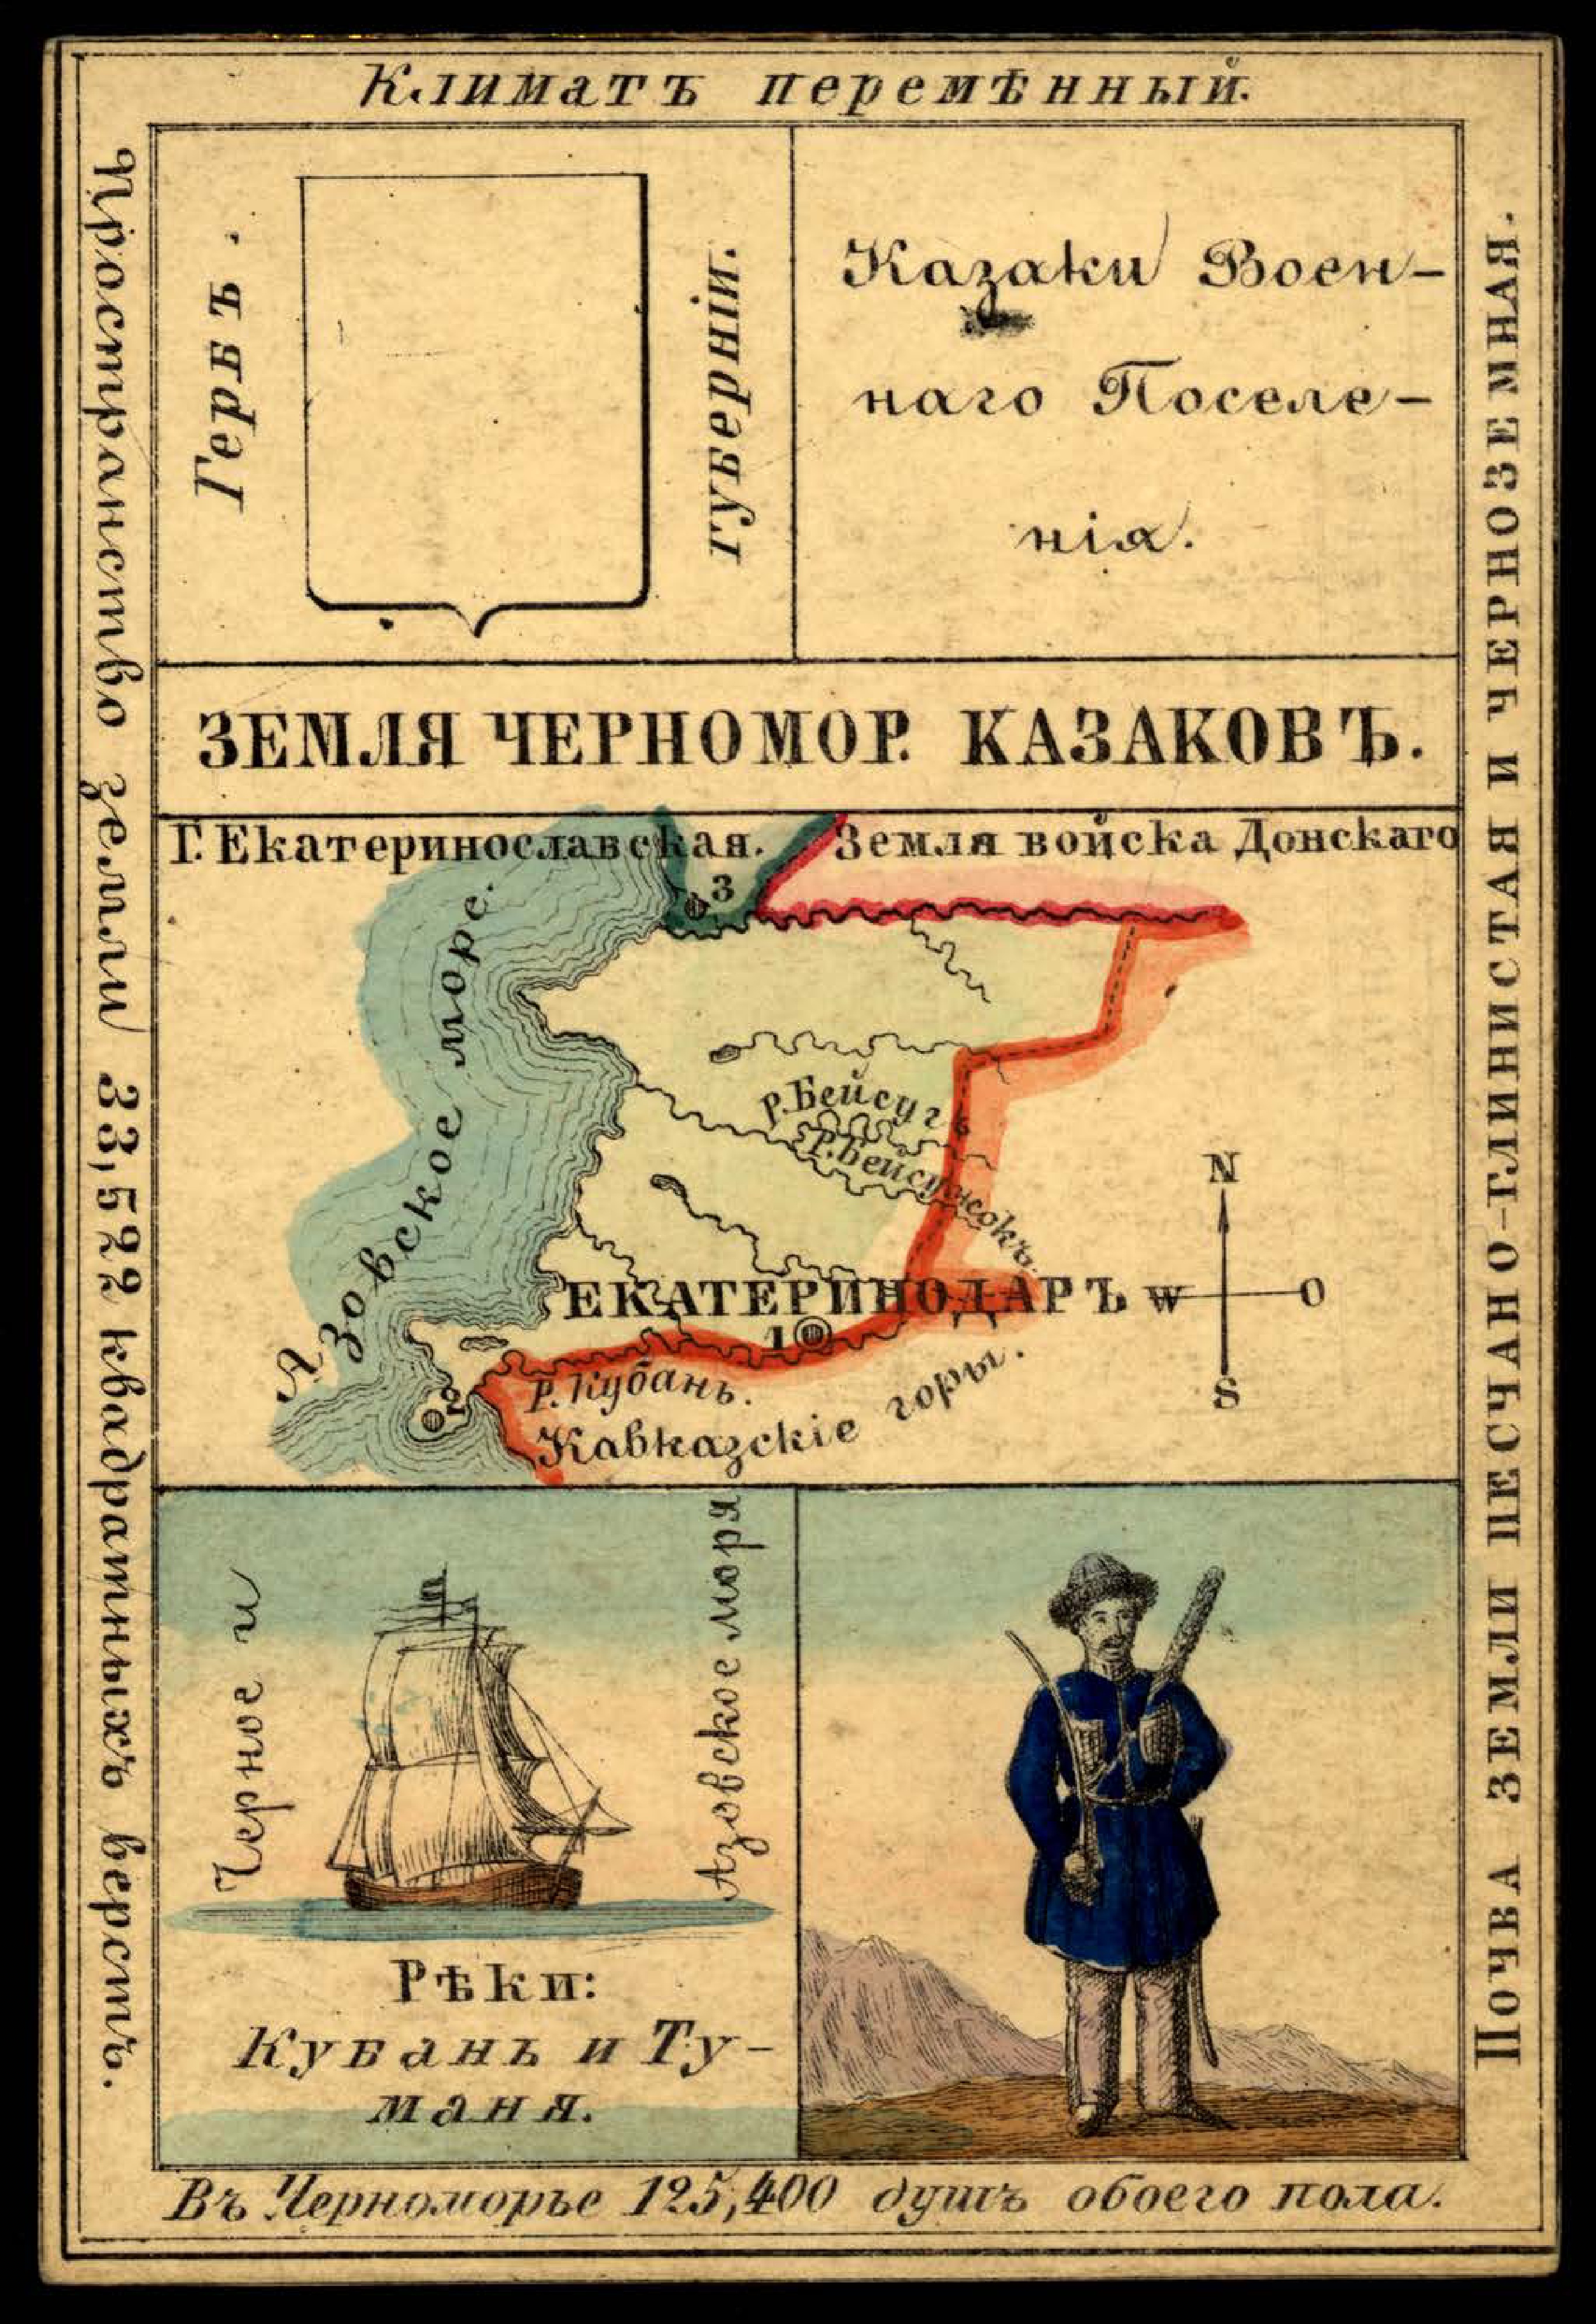 1856. Card from set of geographical cards of the Russian Empire 050